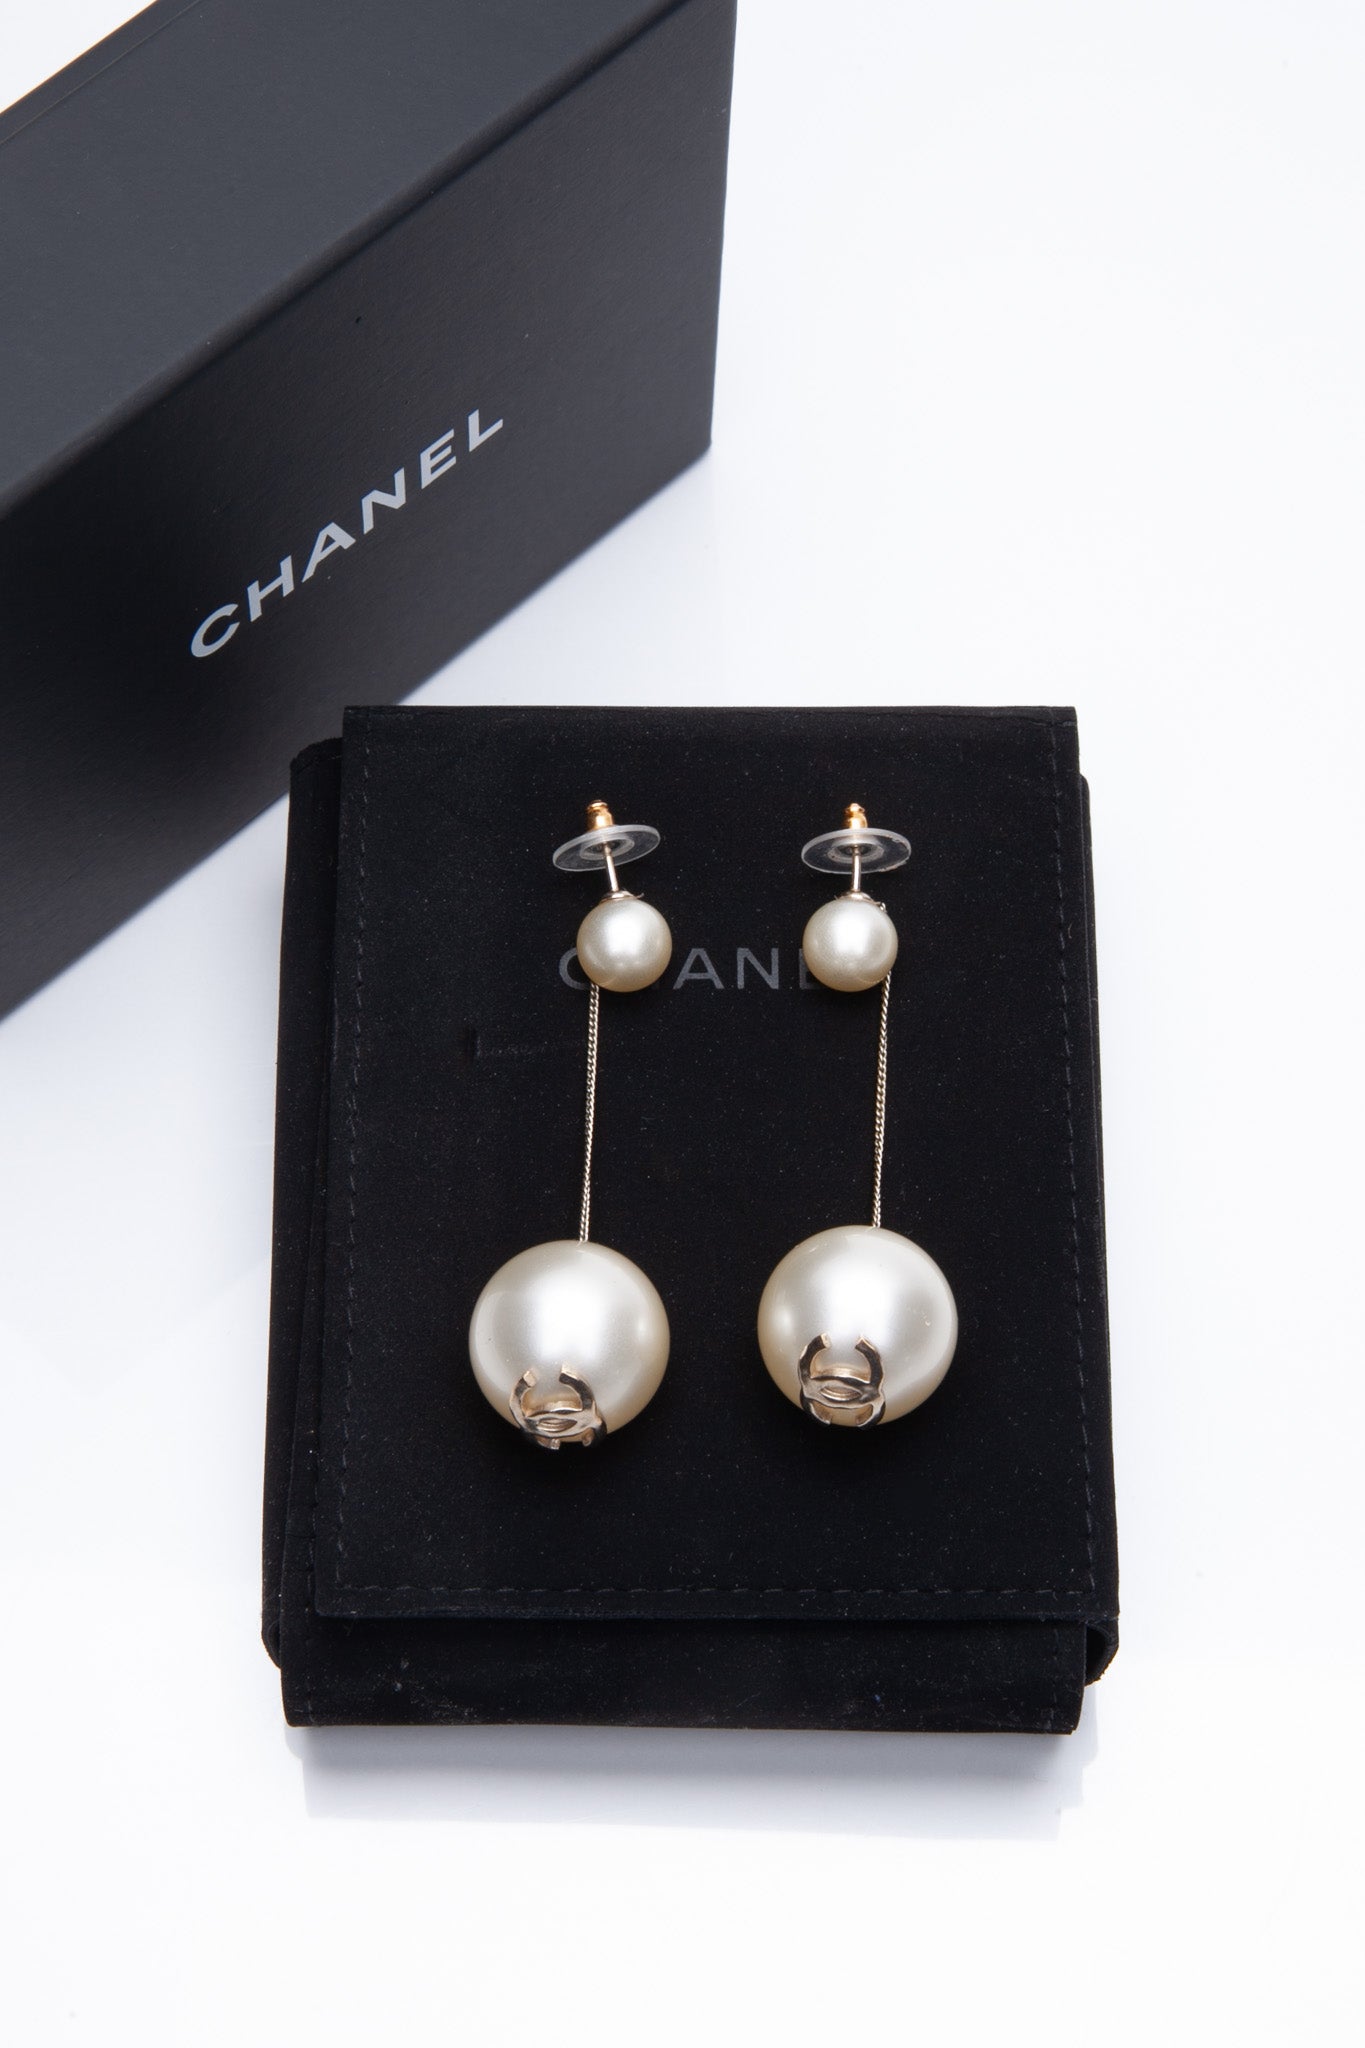 Pearl Earrings Chanel | Iconic Items Paris